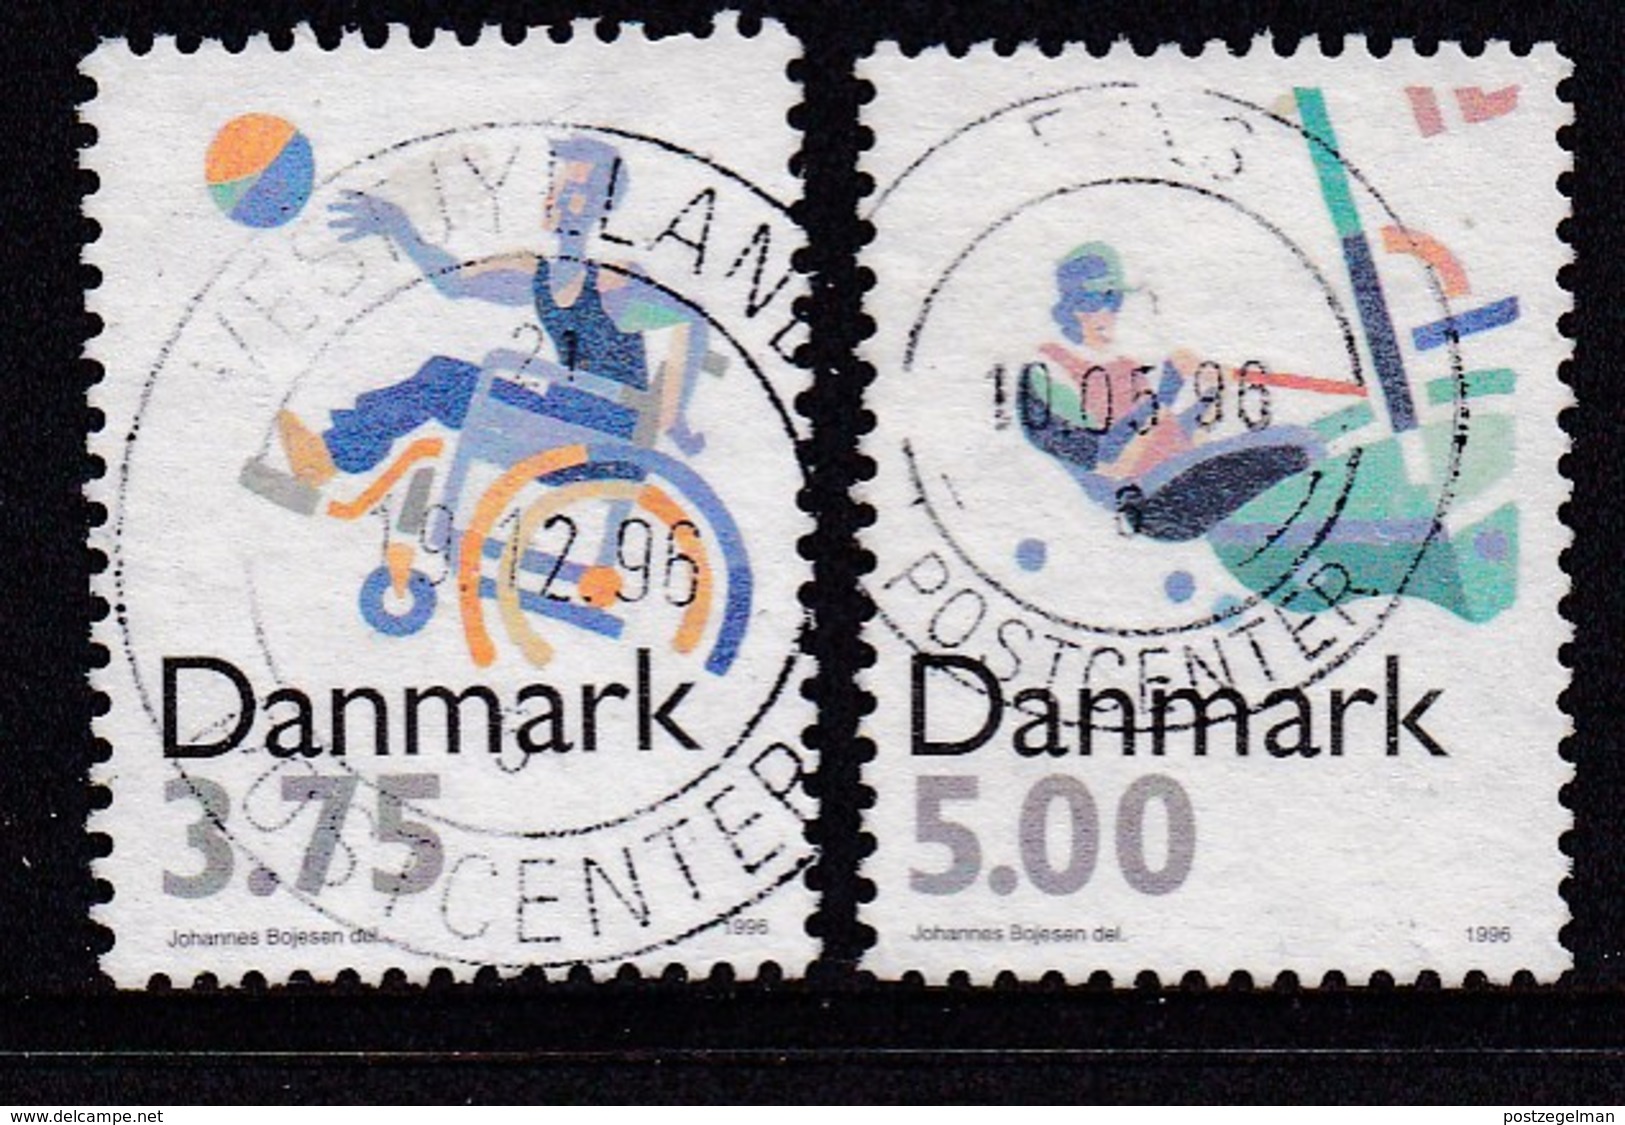 DENMARK, 1996, Used Stamp(s),Olympic Games, MI 1120=1123, #10222, 2 Values Only - Usado